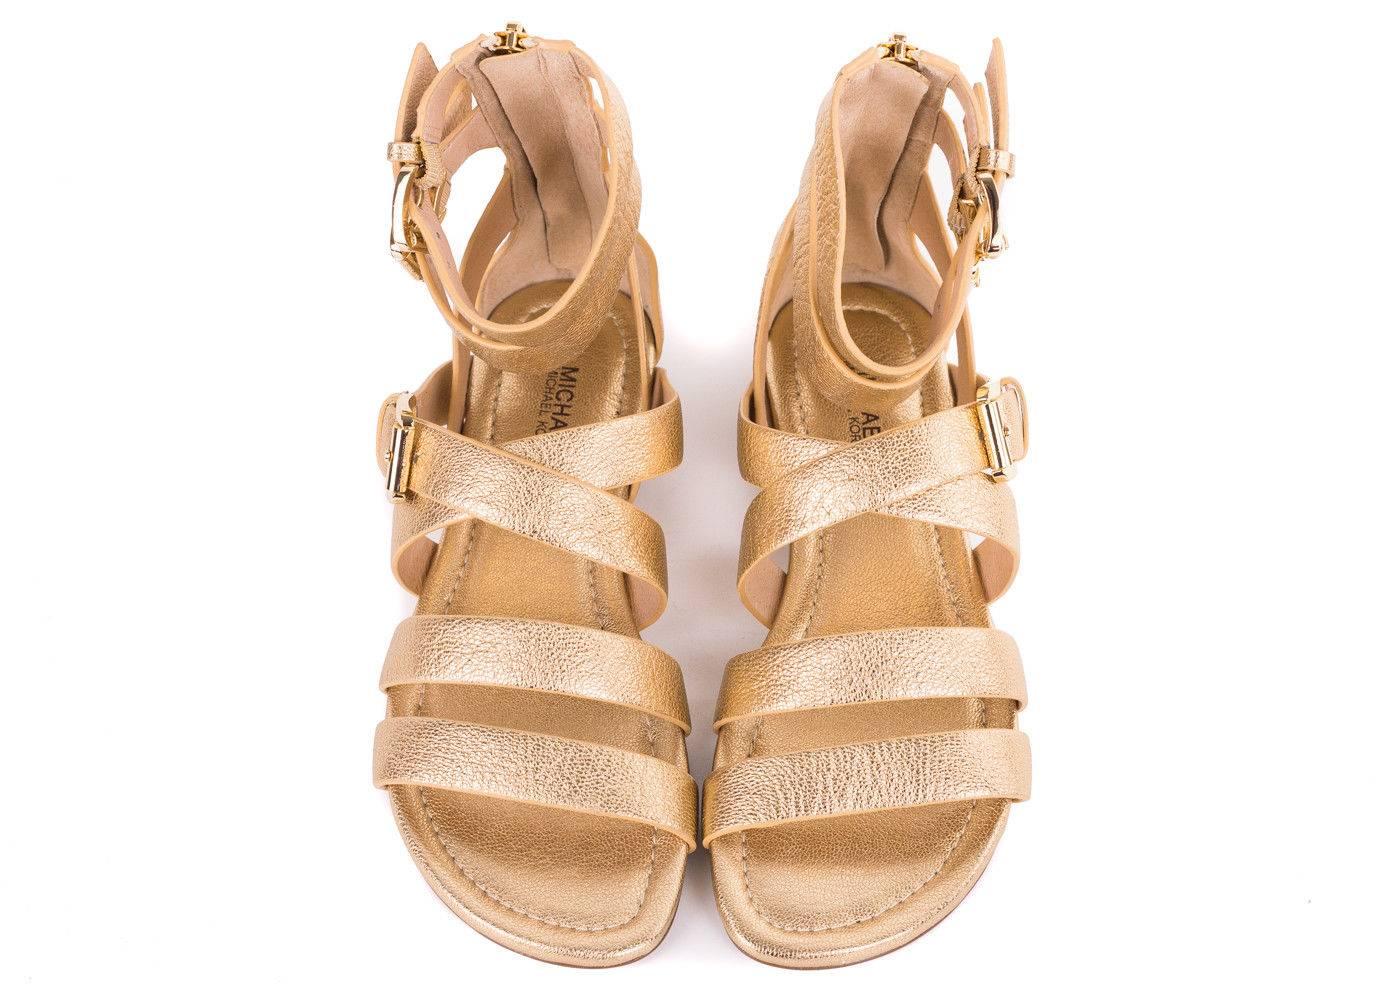 Micheal Kors Gold Sandal will be the final compliment to your ensemble. This shoe features gold tanned grained leather, gladiator style wraps, and double ankle buckle straps. Pair these shoes with a nude colored dress and you are set for the